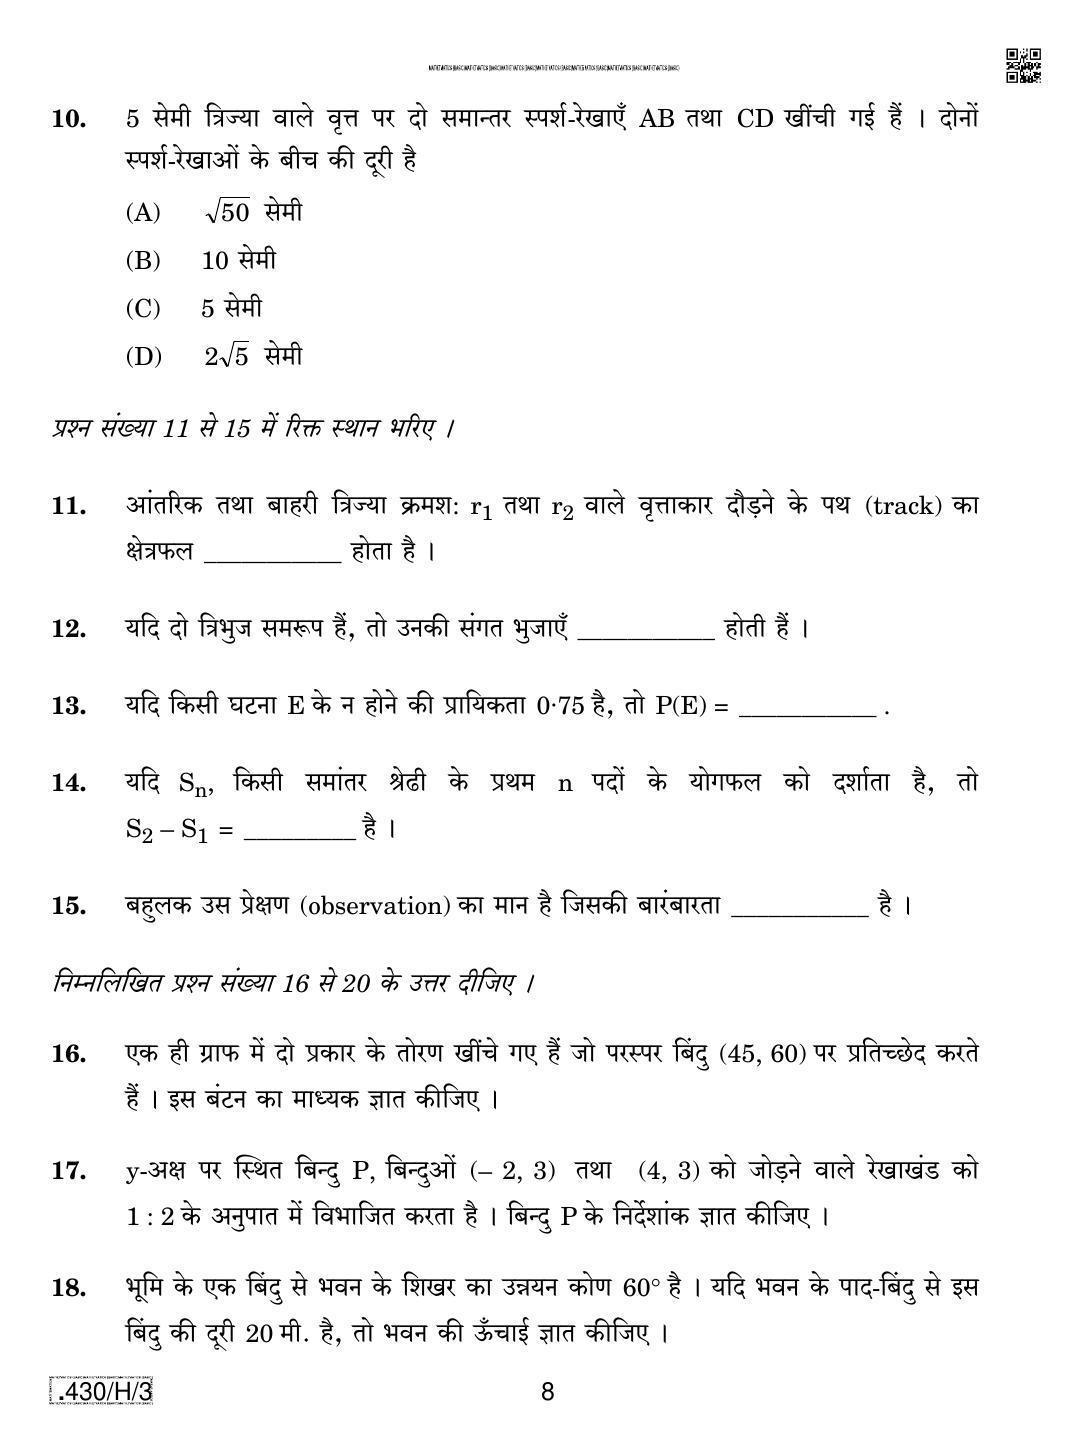 CBSE Class 10 430-C-3 - Maths (Basic) 2020 Compartment Question Paper - Page 8